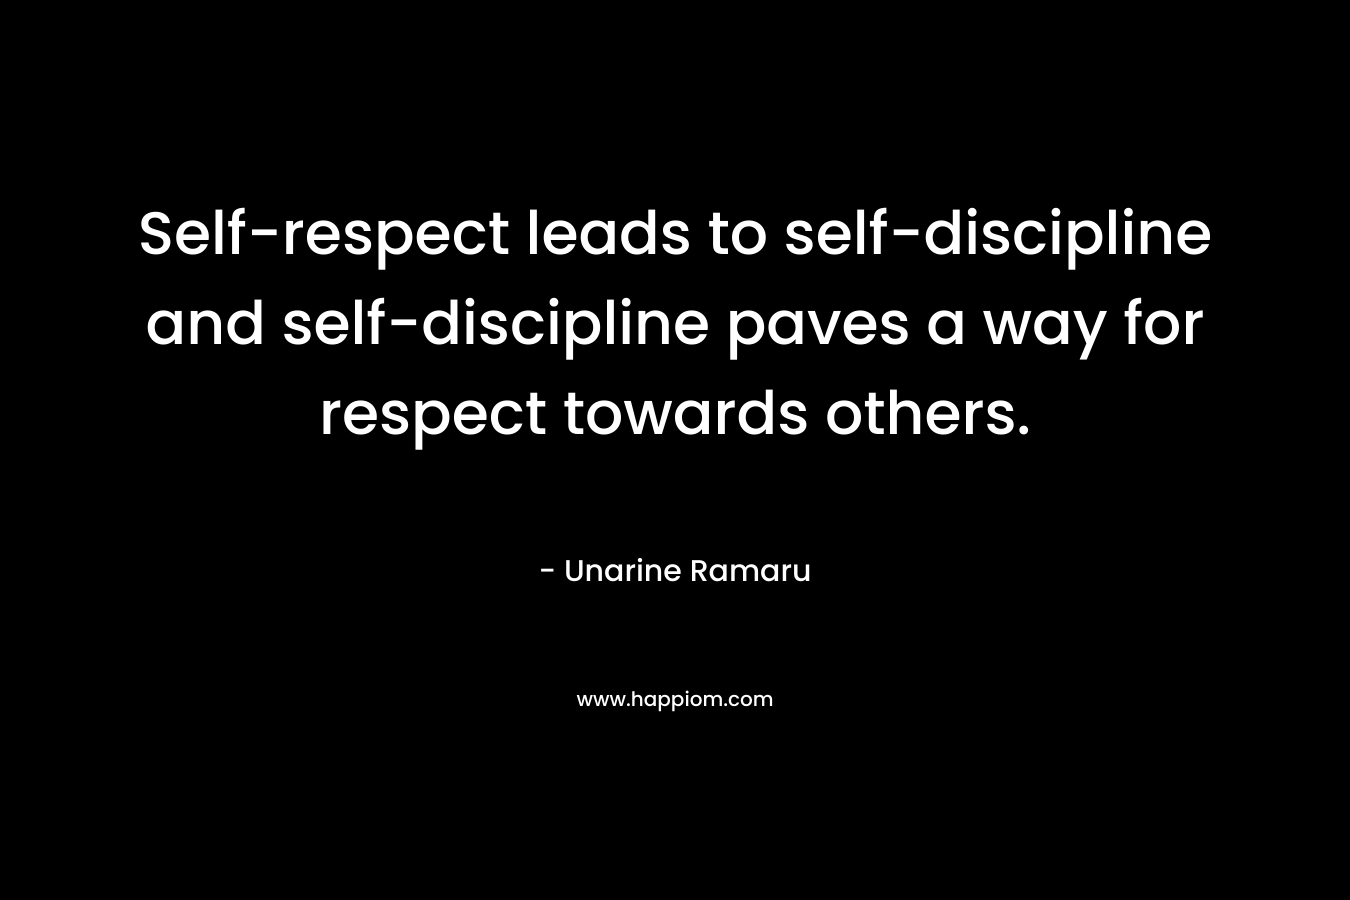 Self-respect leads to self-discipline and self-discipline paves a way for respect towards others. – Unarine Ramaru